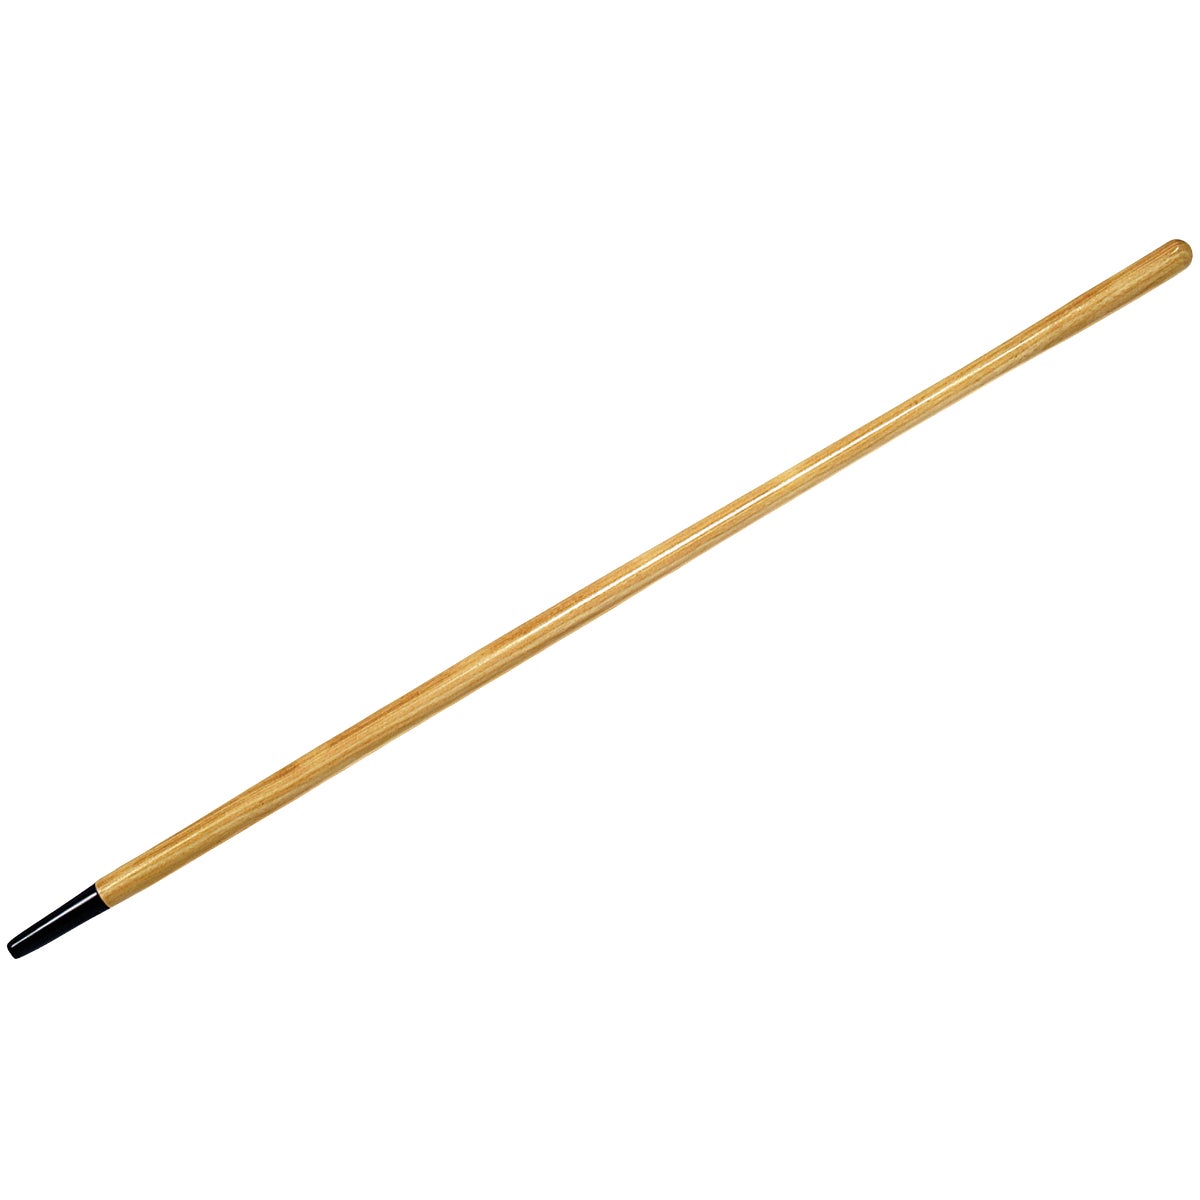 Item 706114, Replacement wood handle for heavy cotton hoe. 1-3/8" diameter.